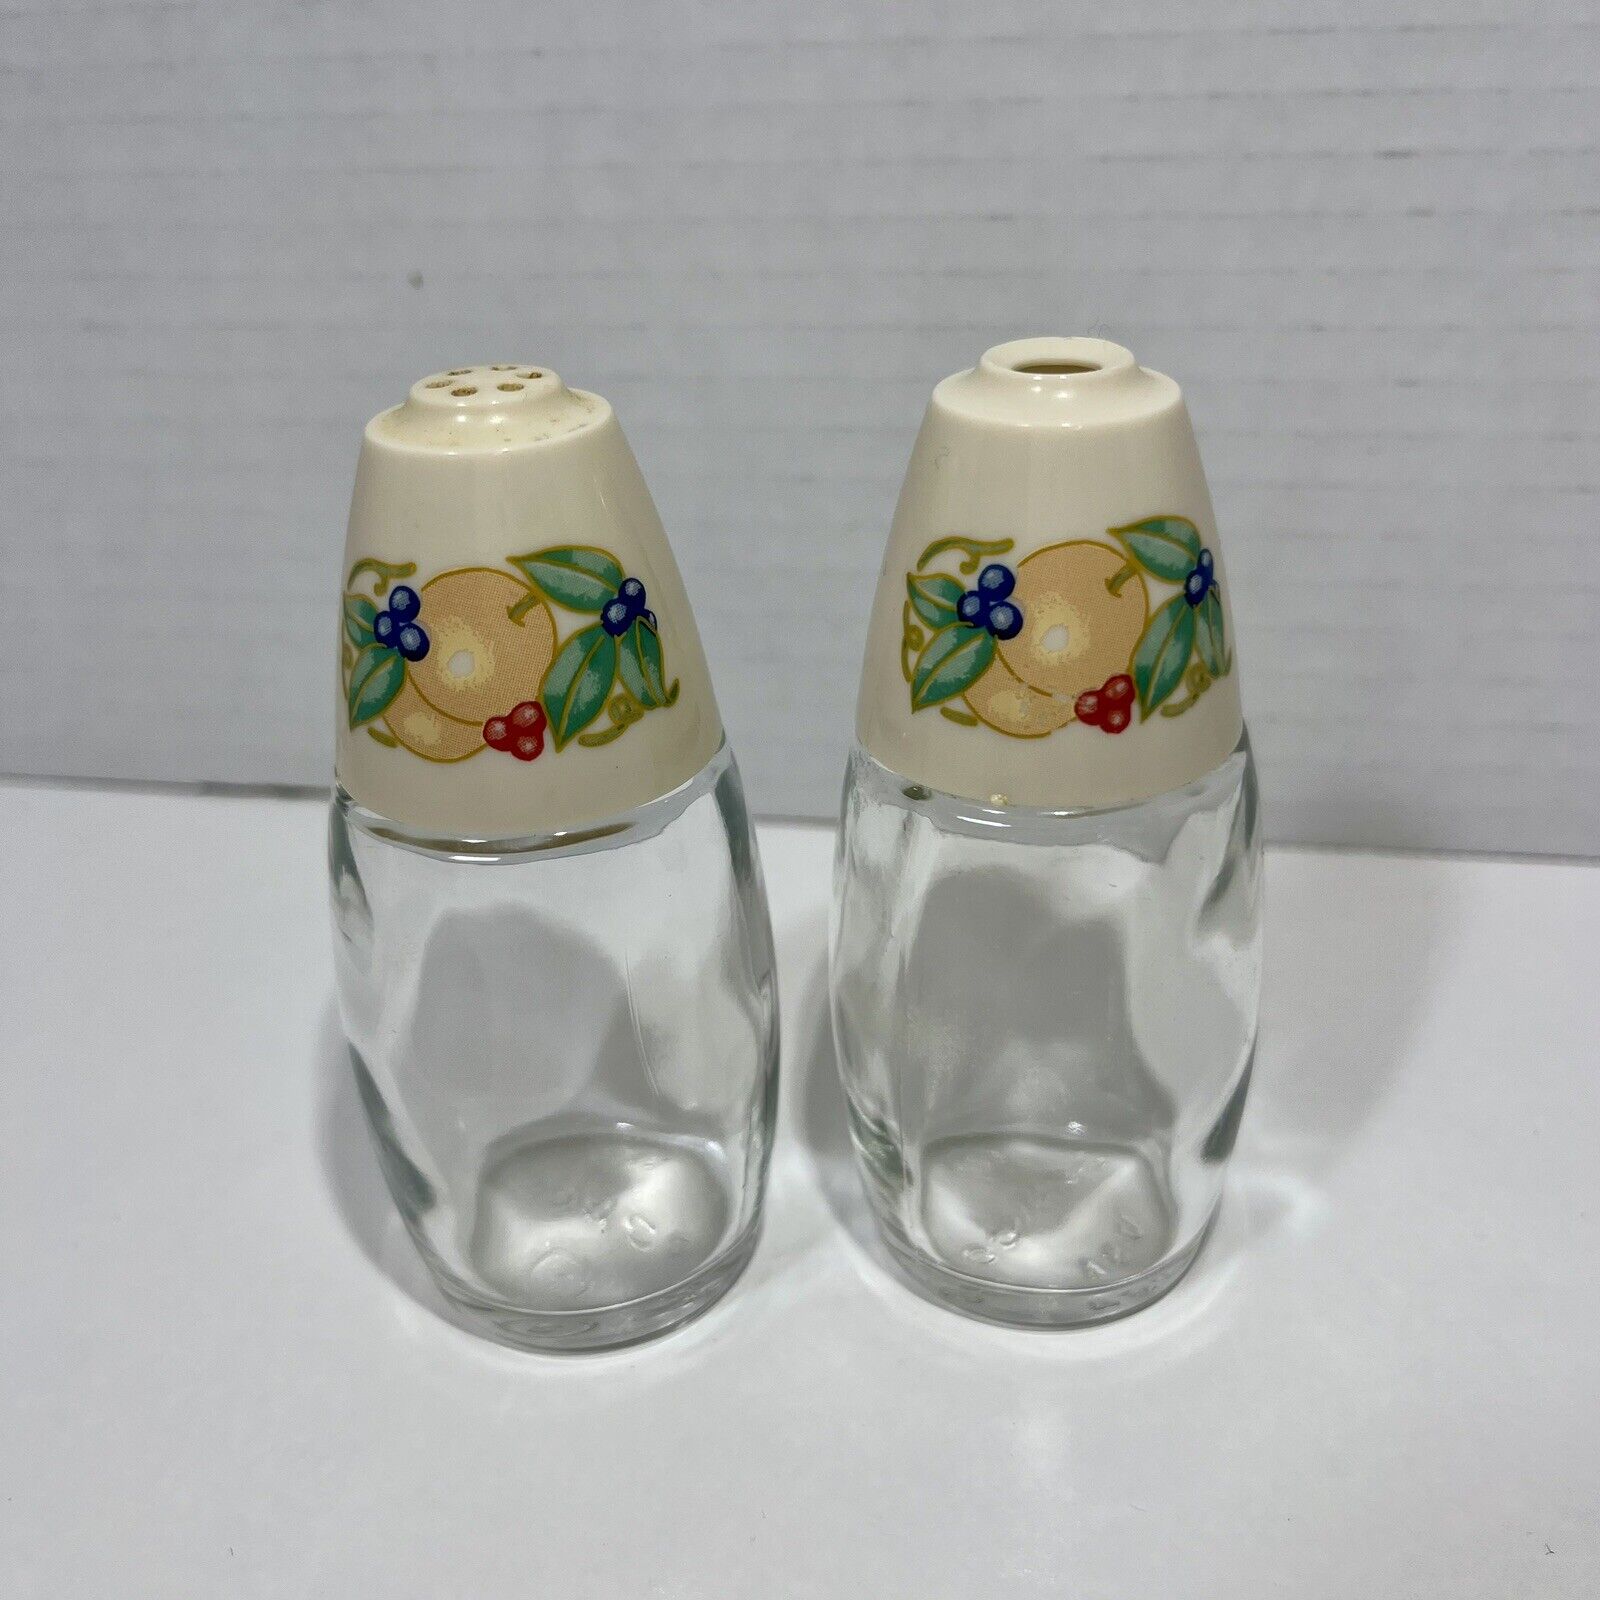 Vintage Corelle Salt and Pepper Shakers Gemco Glassware and Plastic Lid